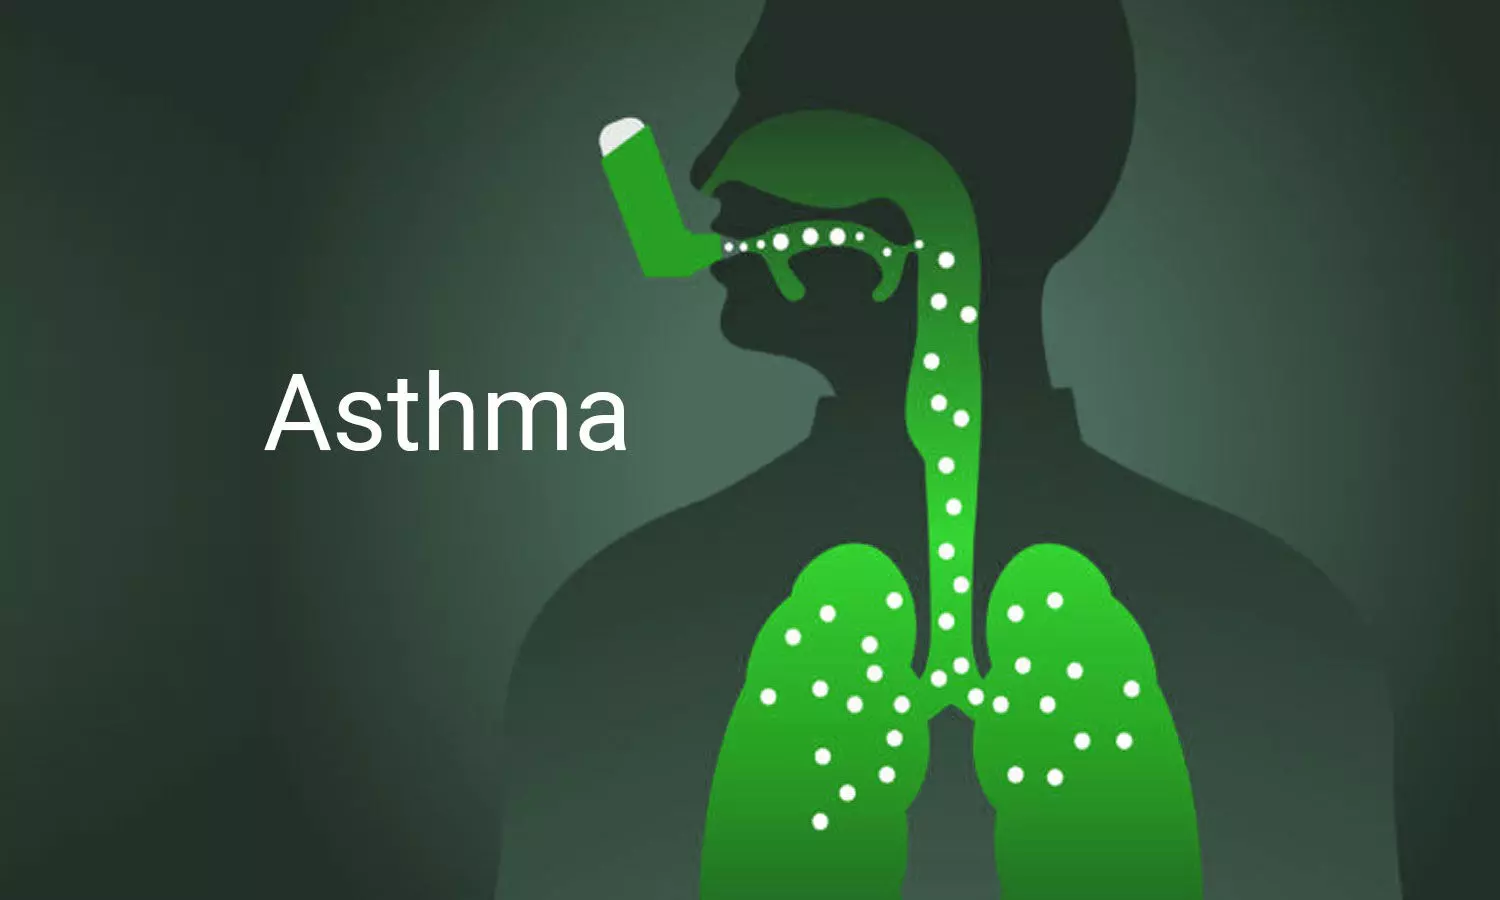 Keto diet may be good for asthma patients